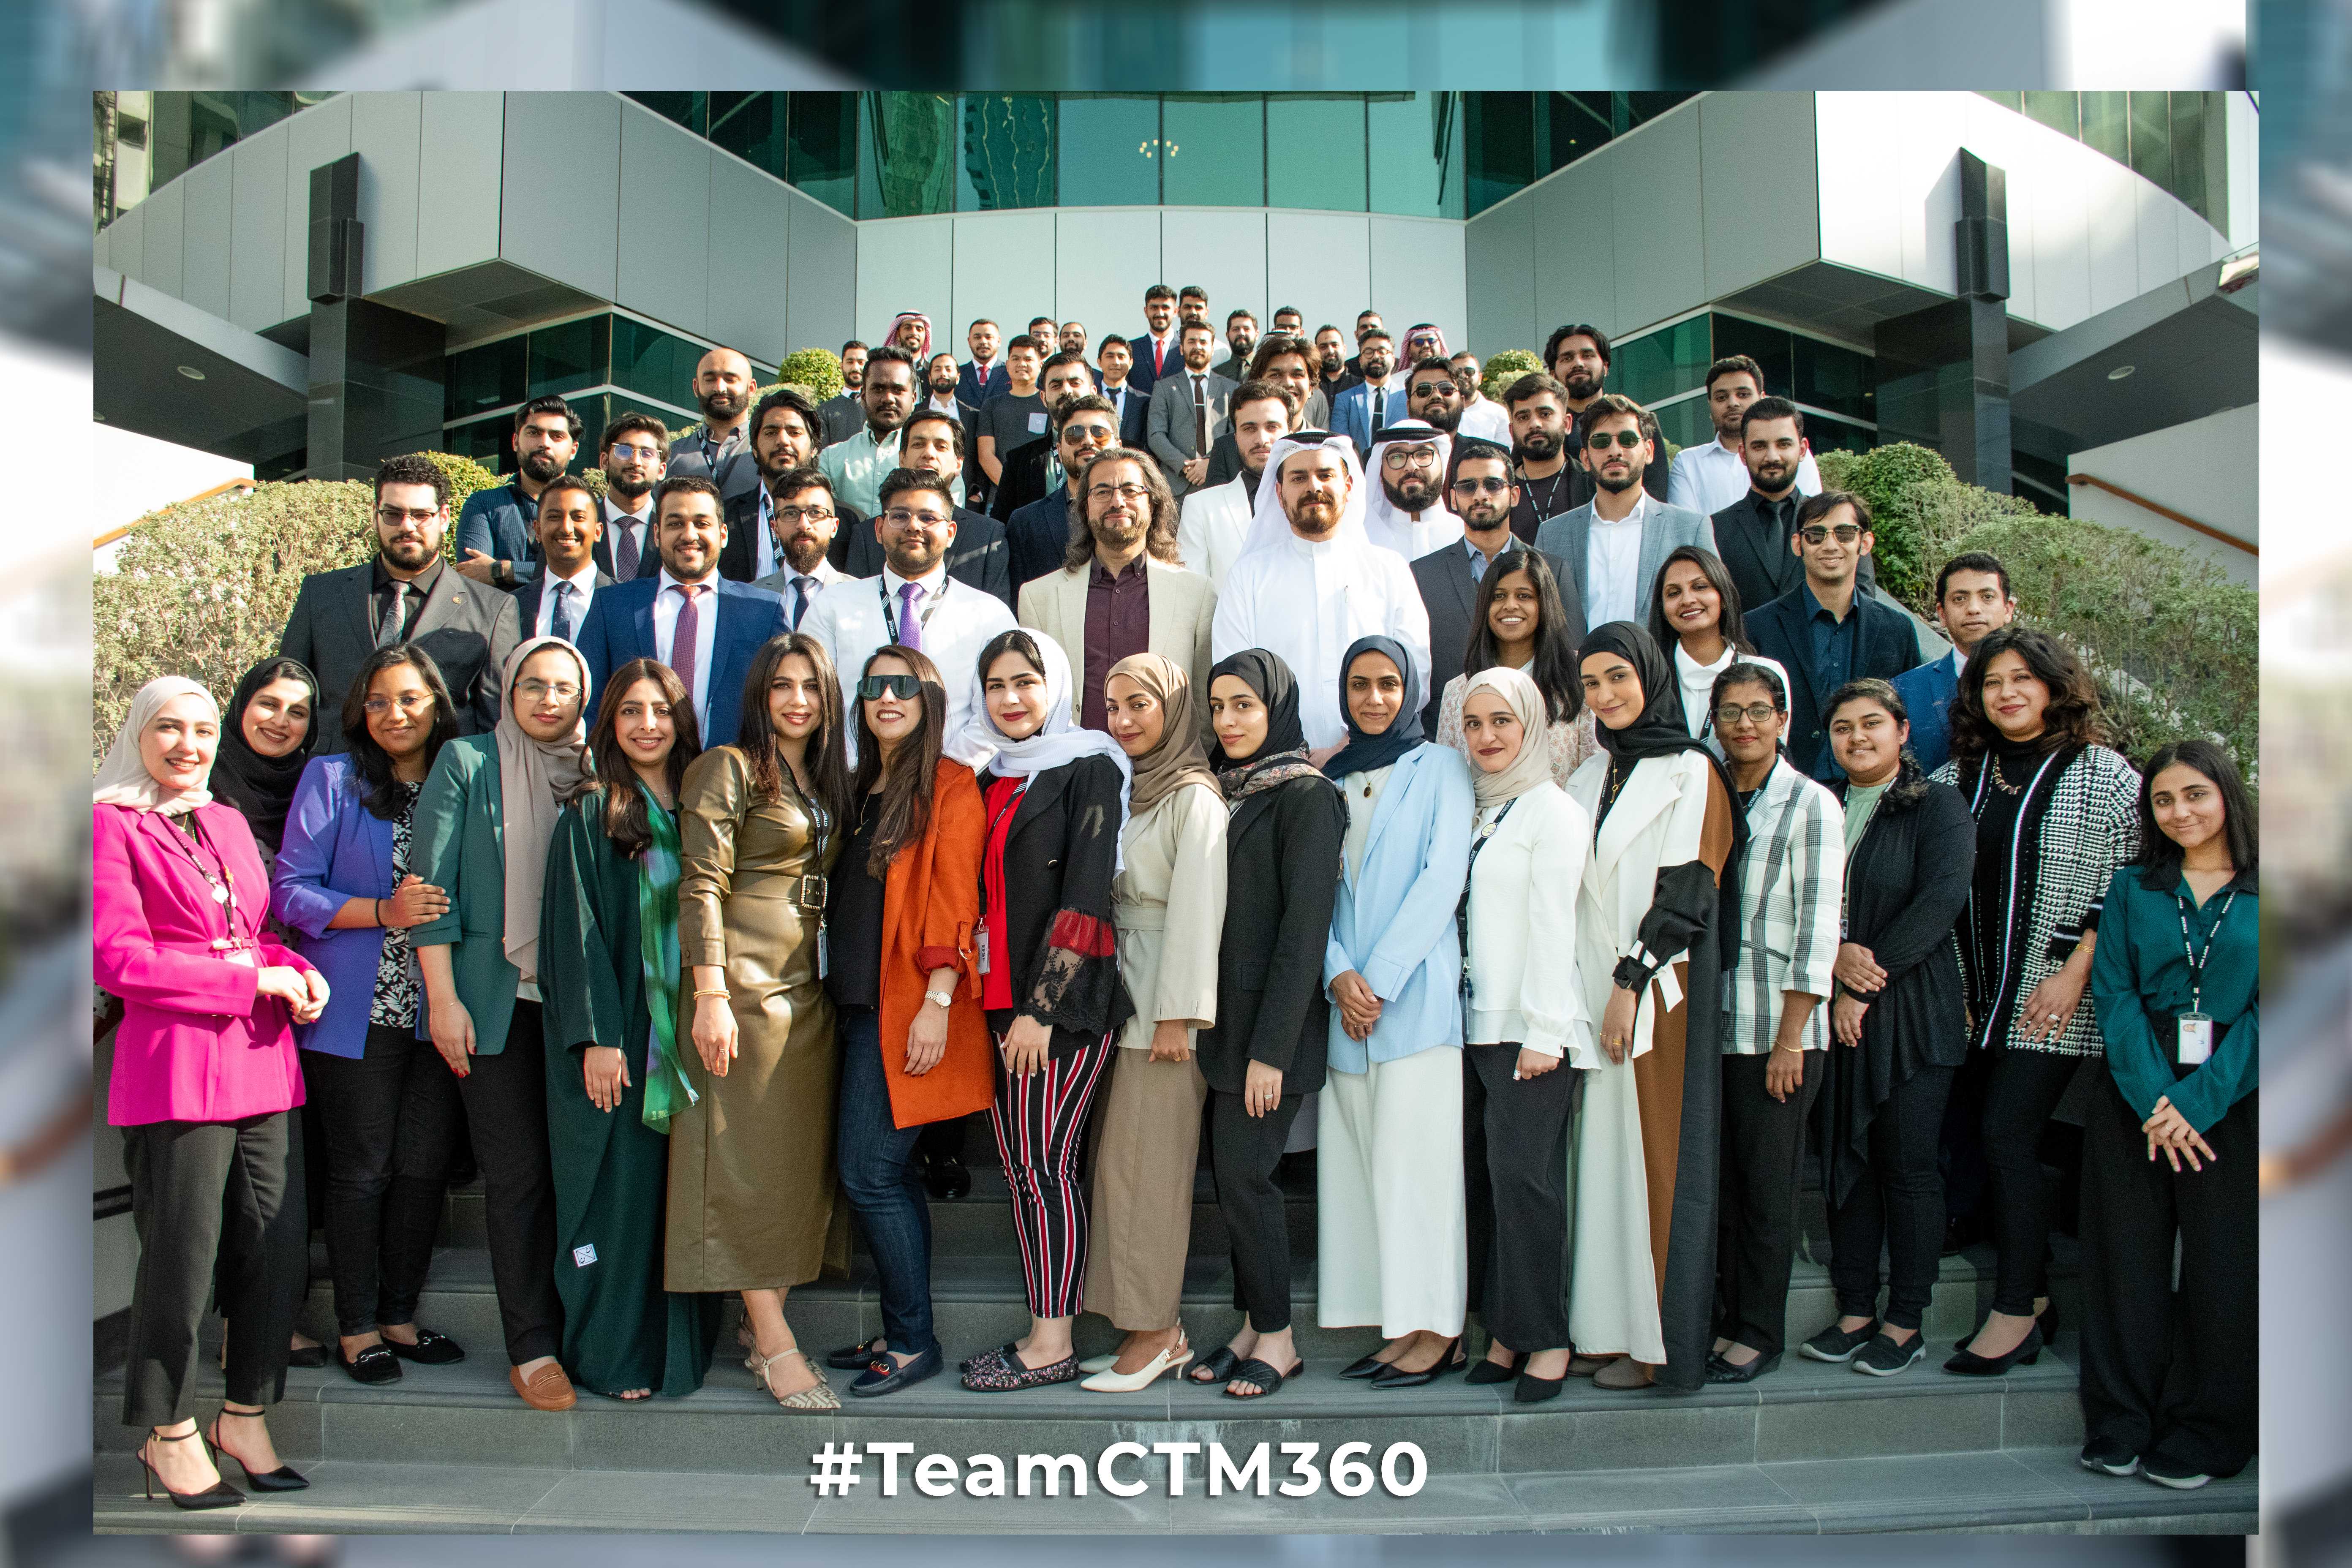 CTM360: The self-funded cybersecurity vendor thrives in the Middle East